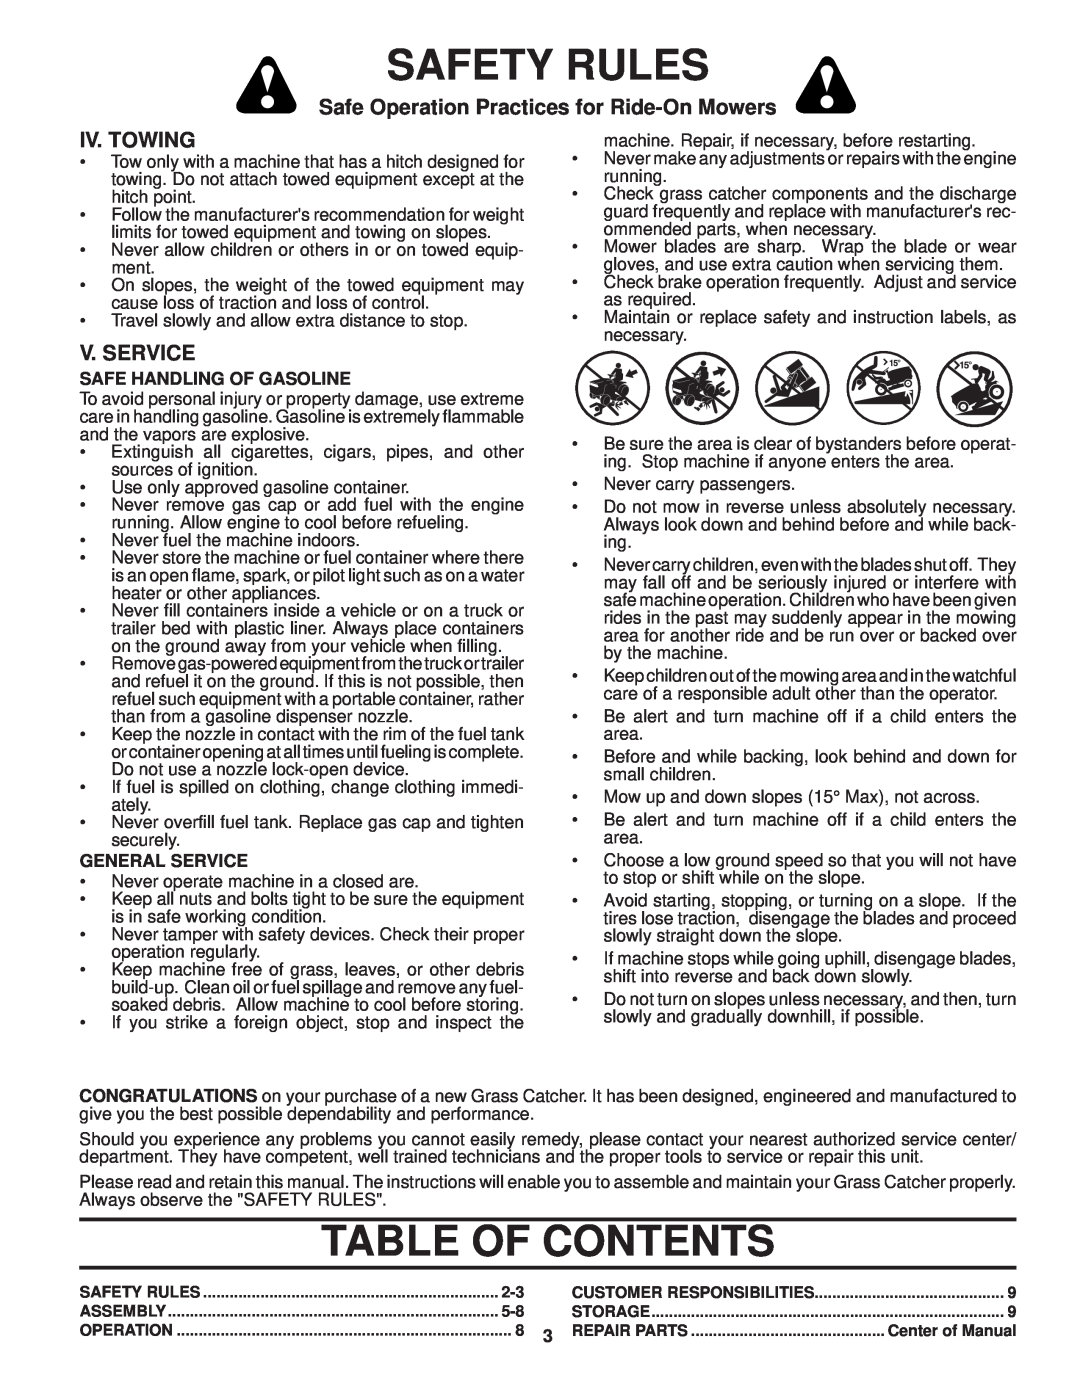 Husqvarna H348SG Table Of Contents, Iv. Towing, V. Service, Safety Rules, Safe Operation Practices for Ride-On Mowers 